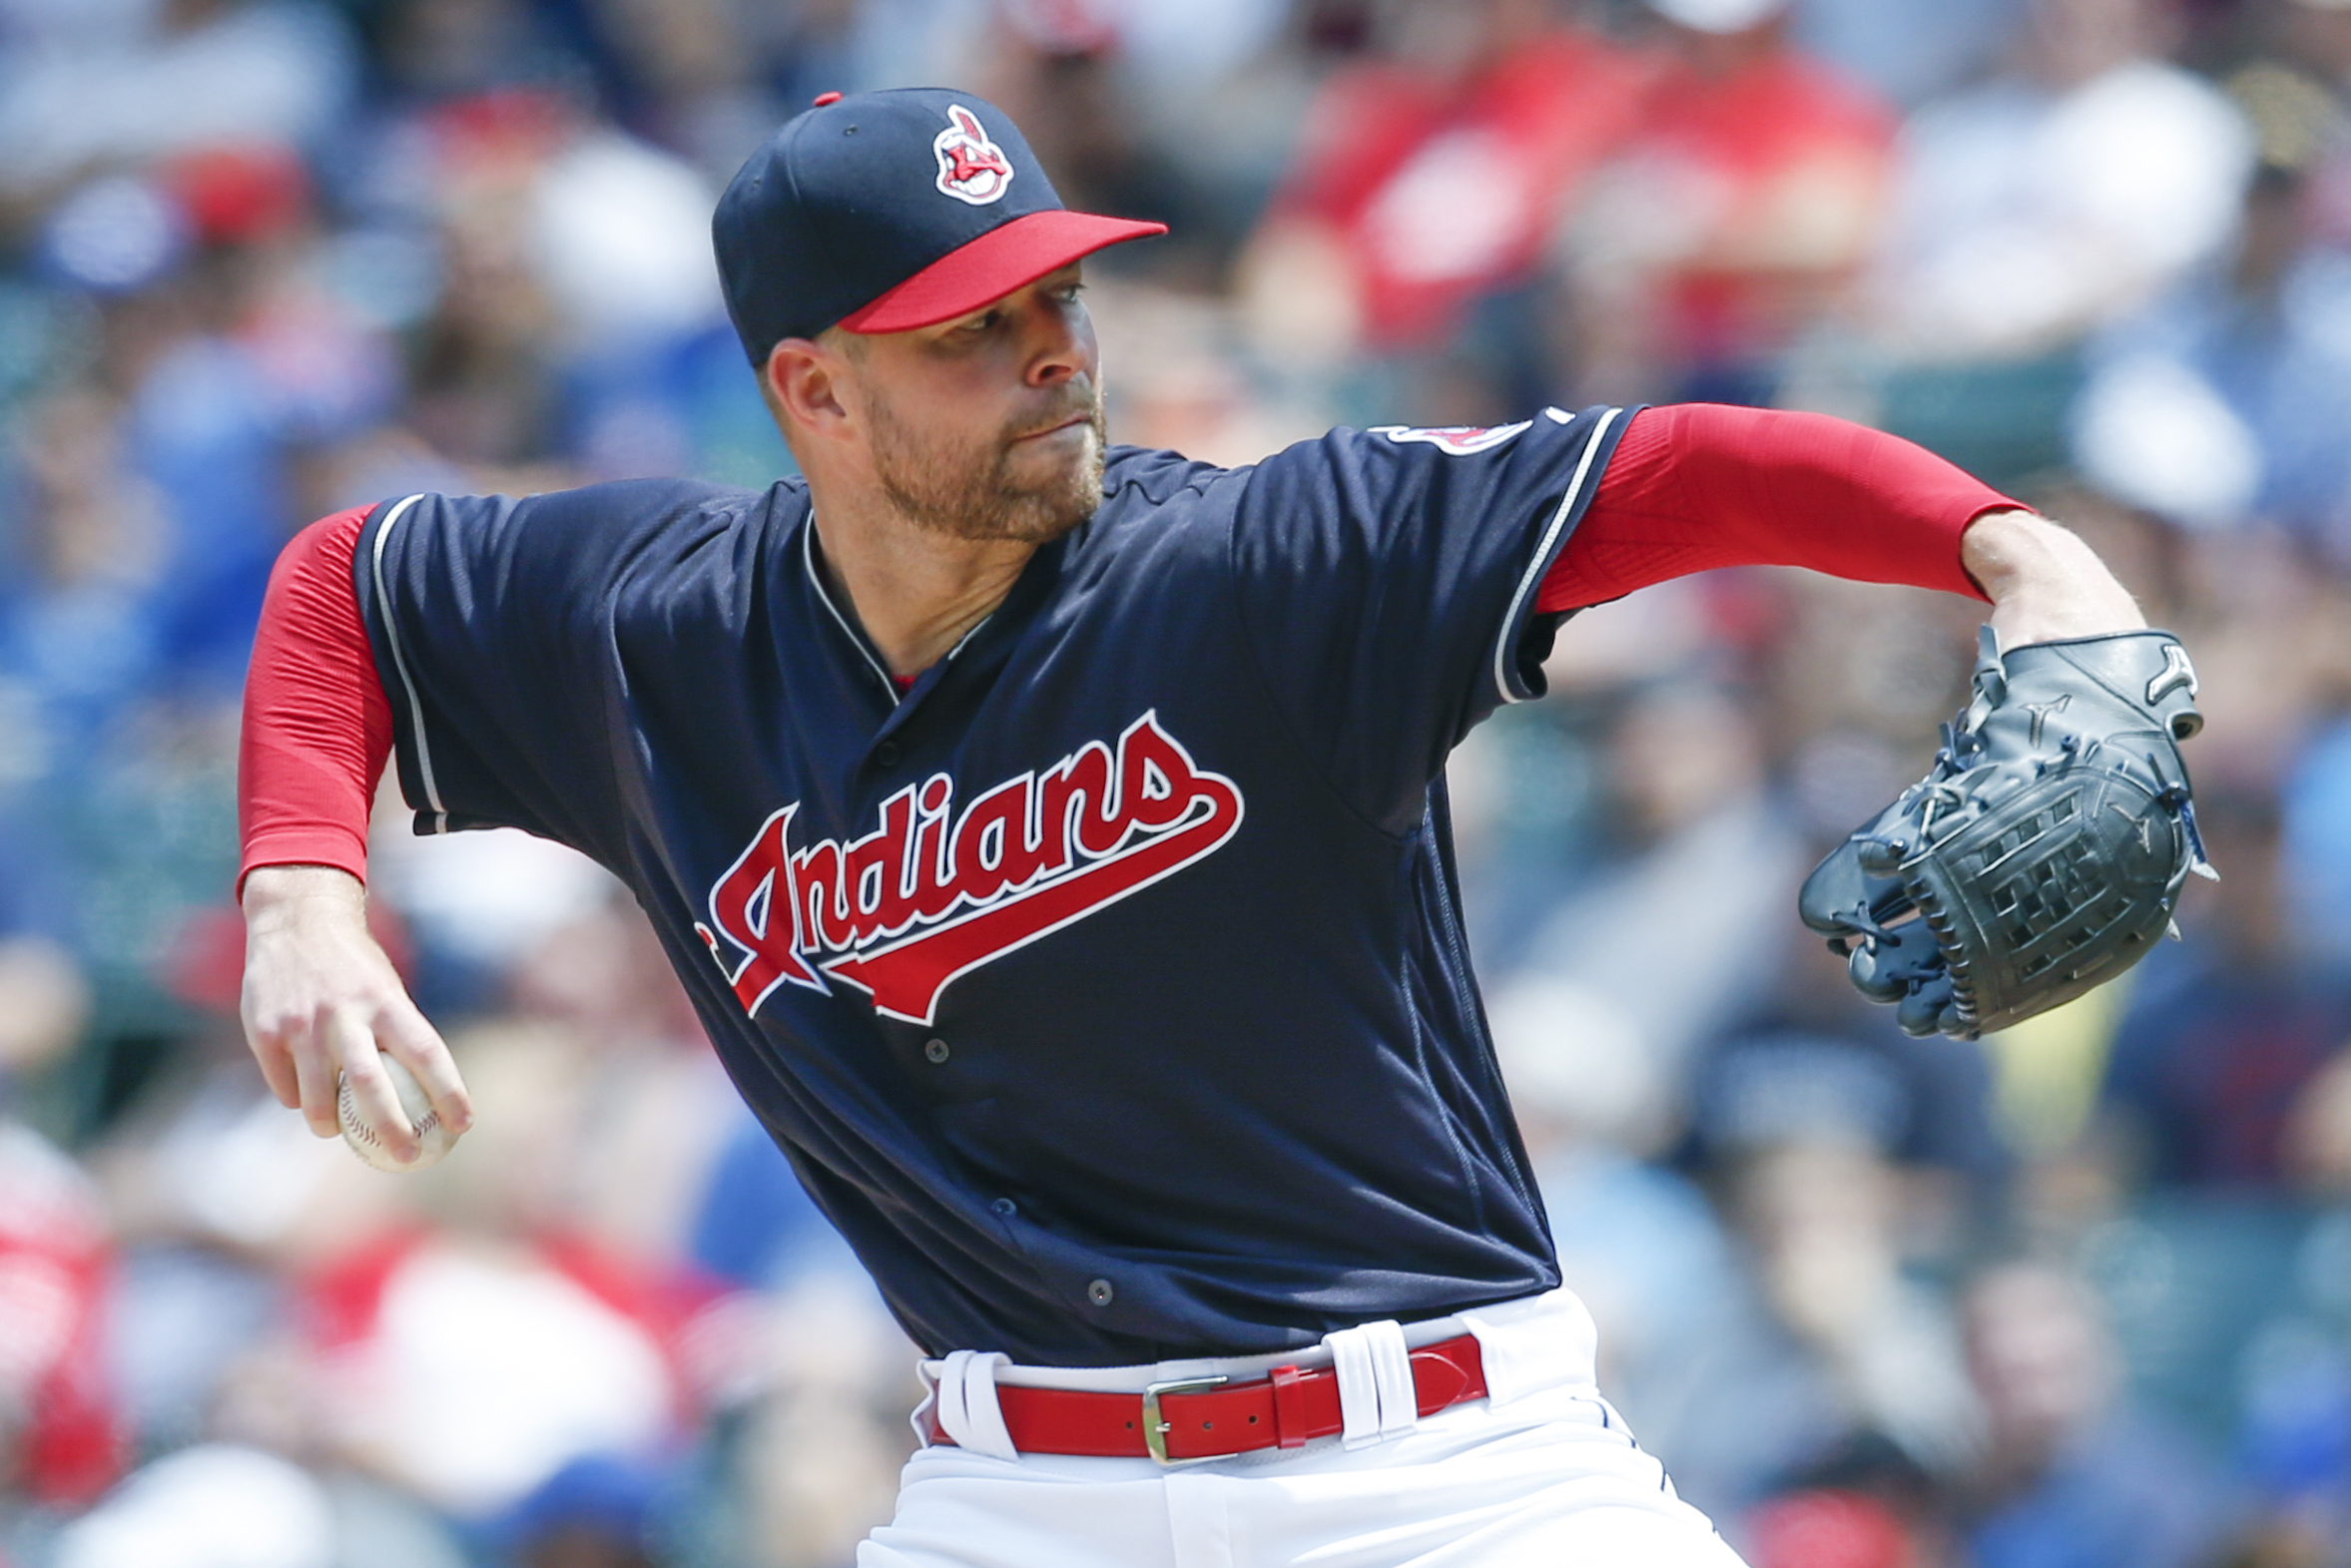 Indians ace Corey Kluber is thrilled to watch Game 3 of the NBA